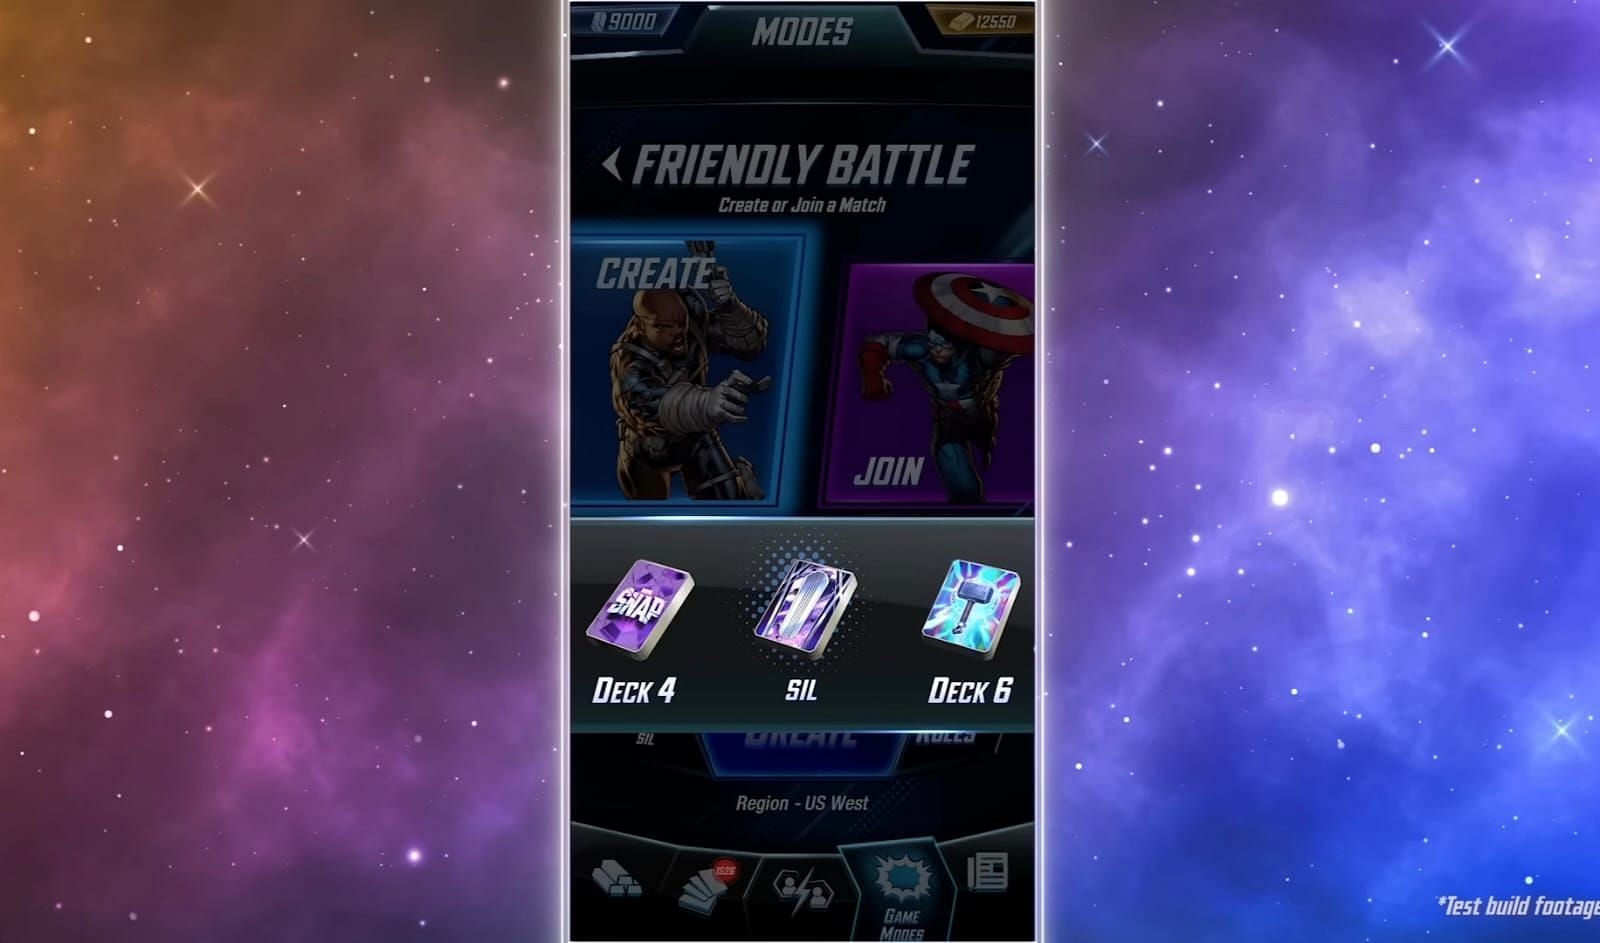 The new Marvel Snap Battle Mode: how it works and how to challenge a friend